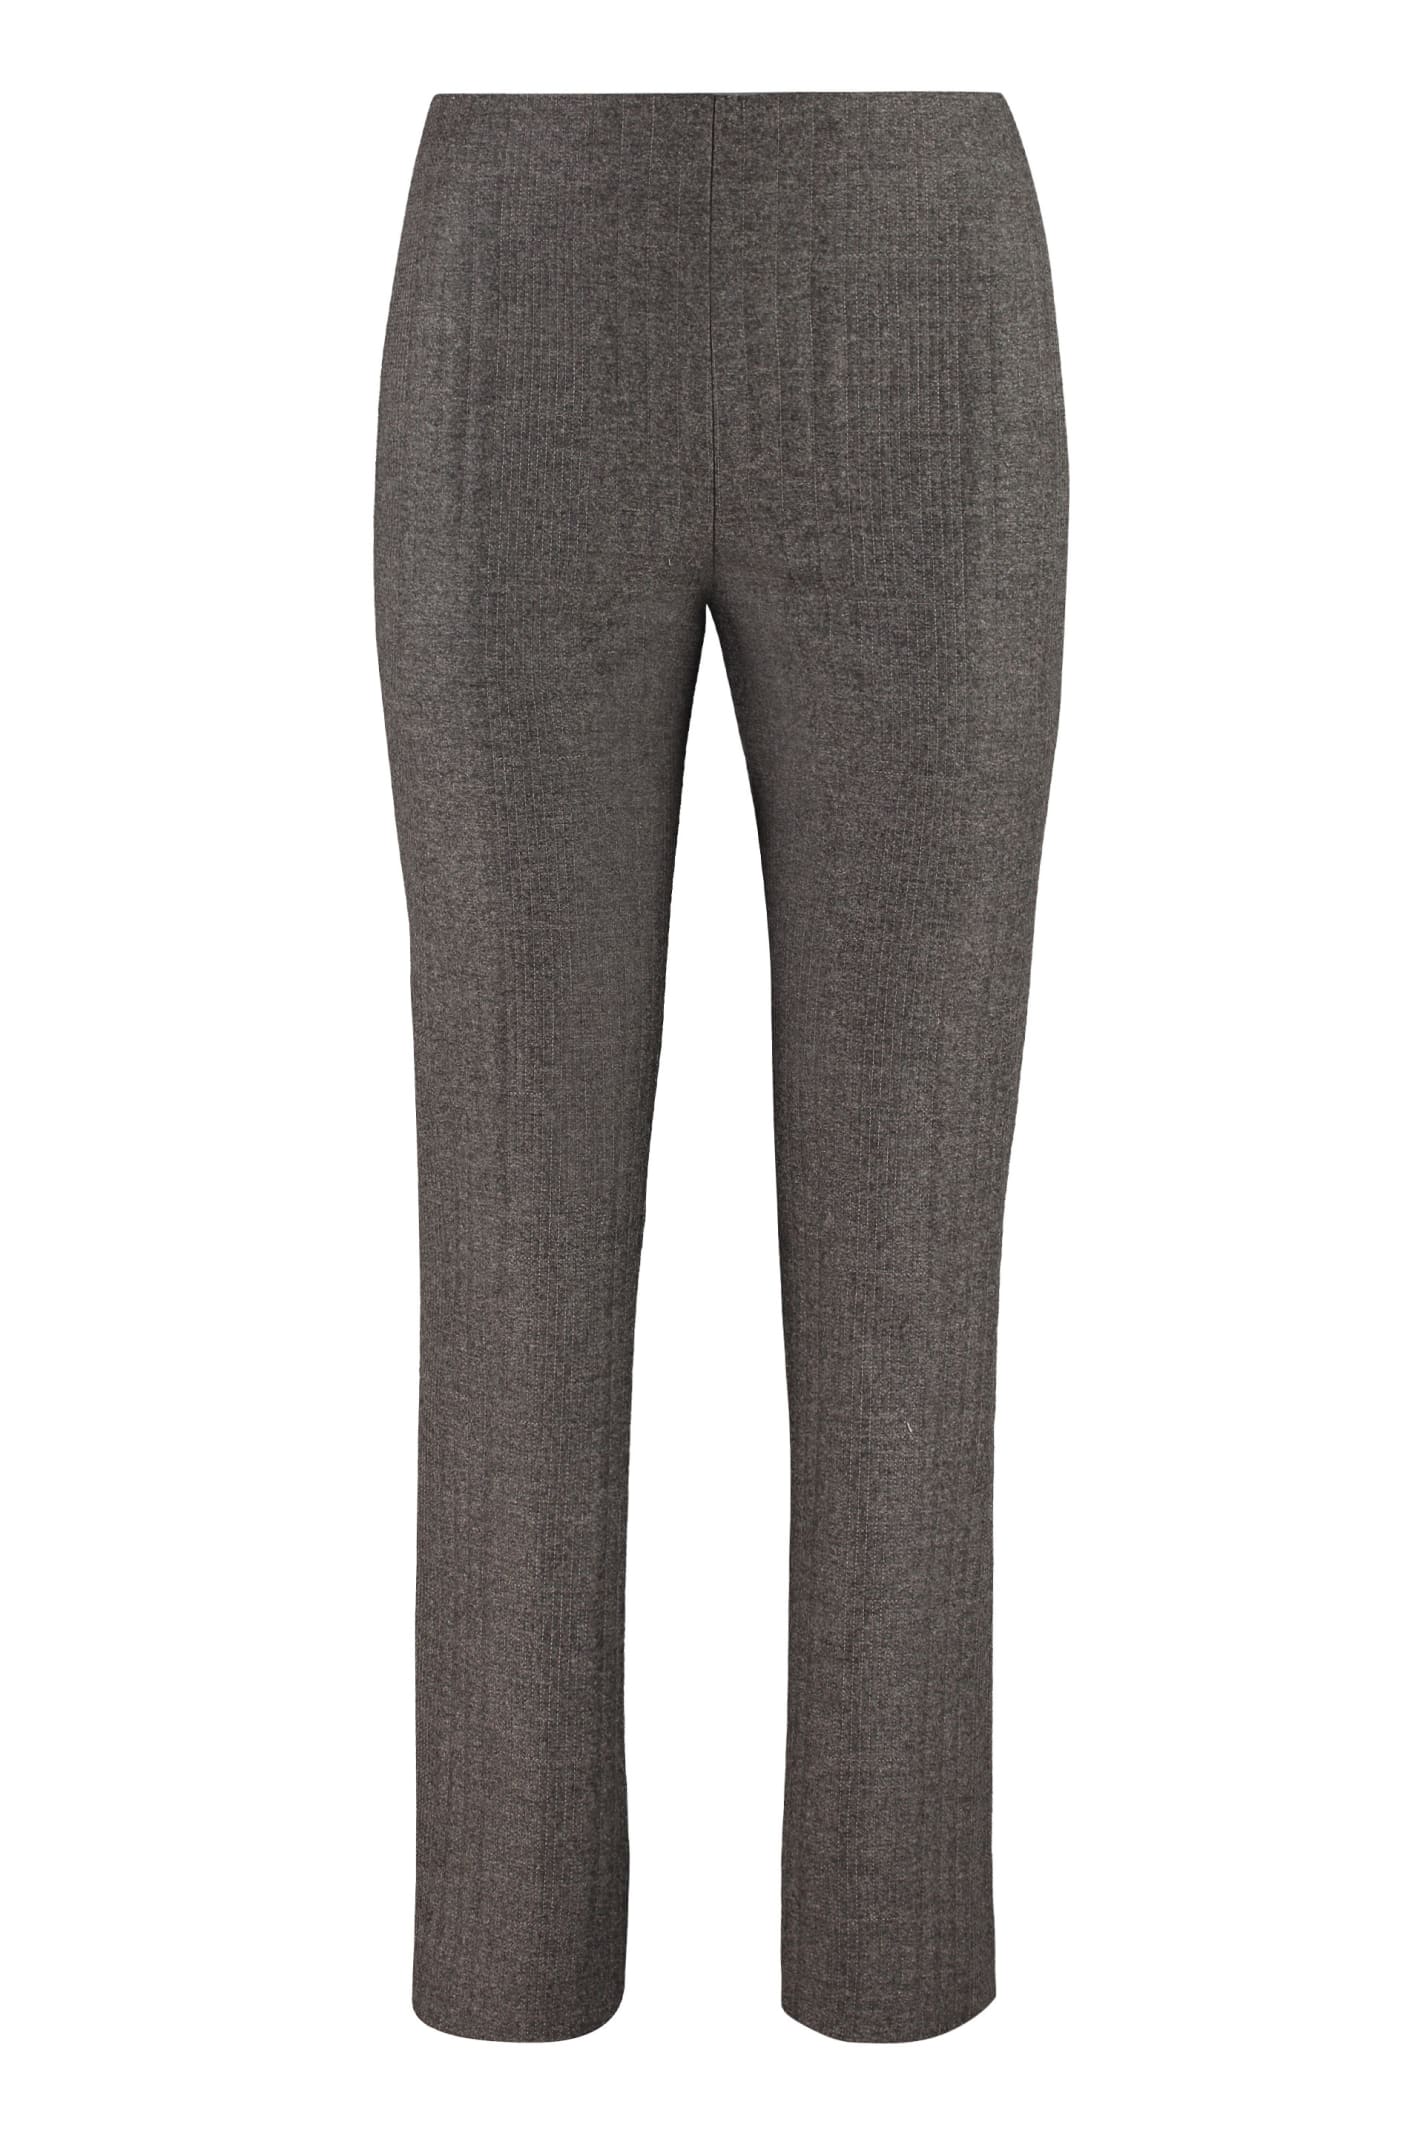 Fendi Flannel And Cashmere Trousers